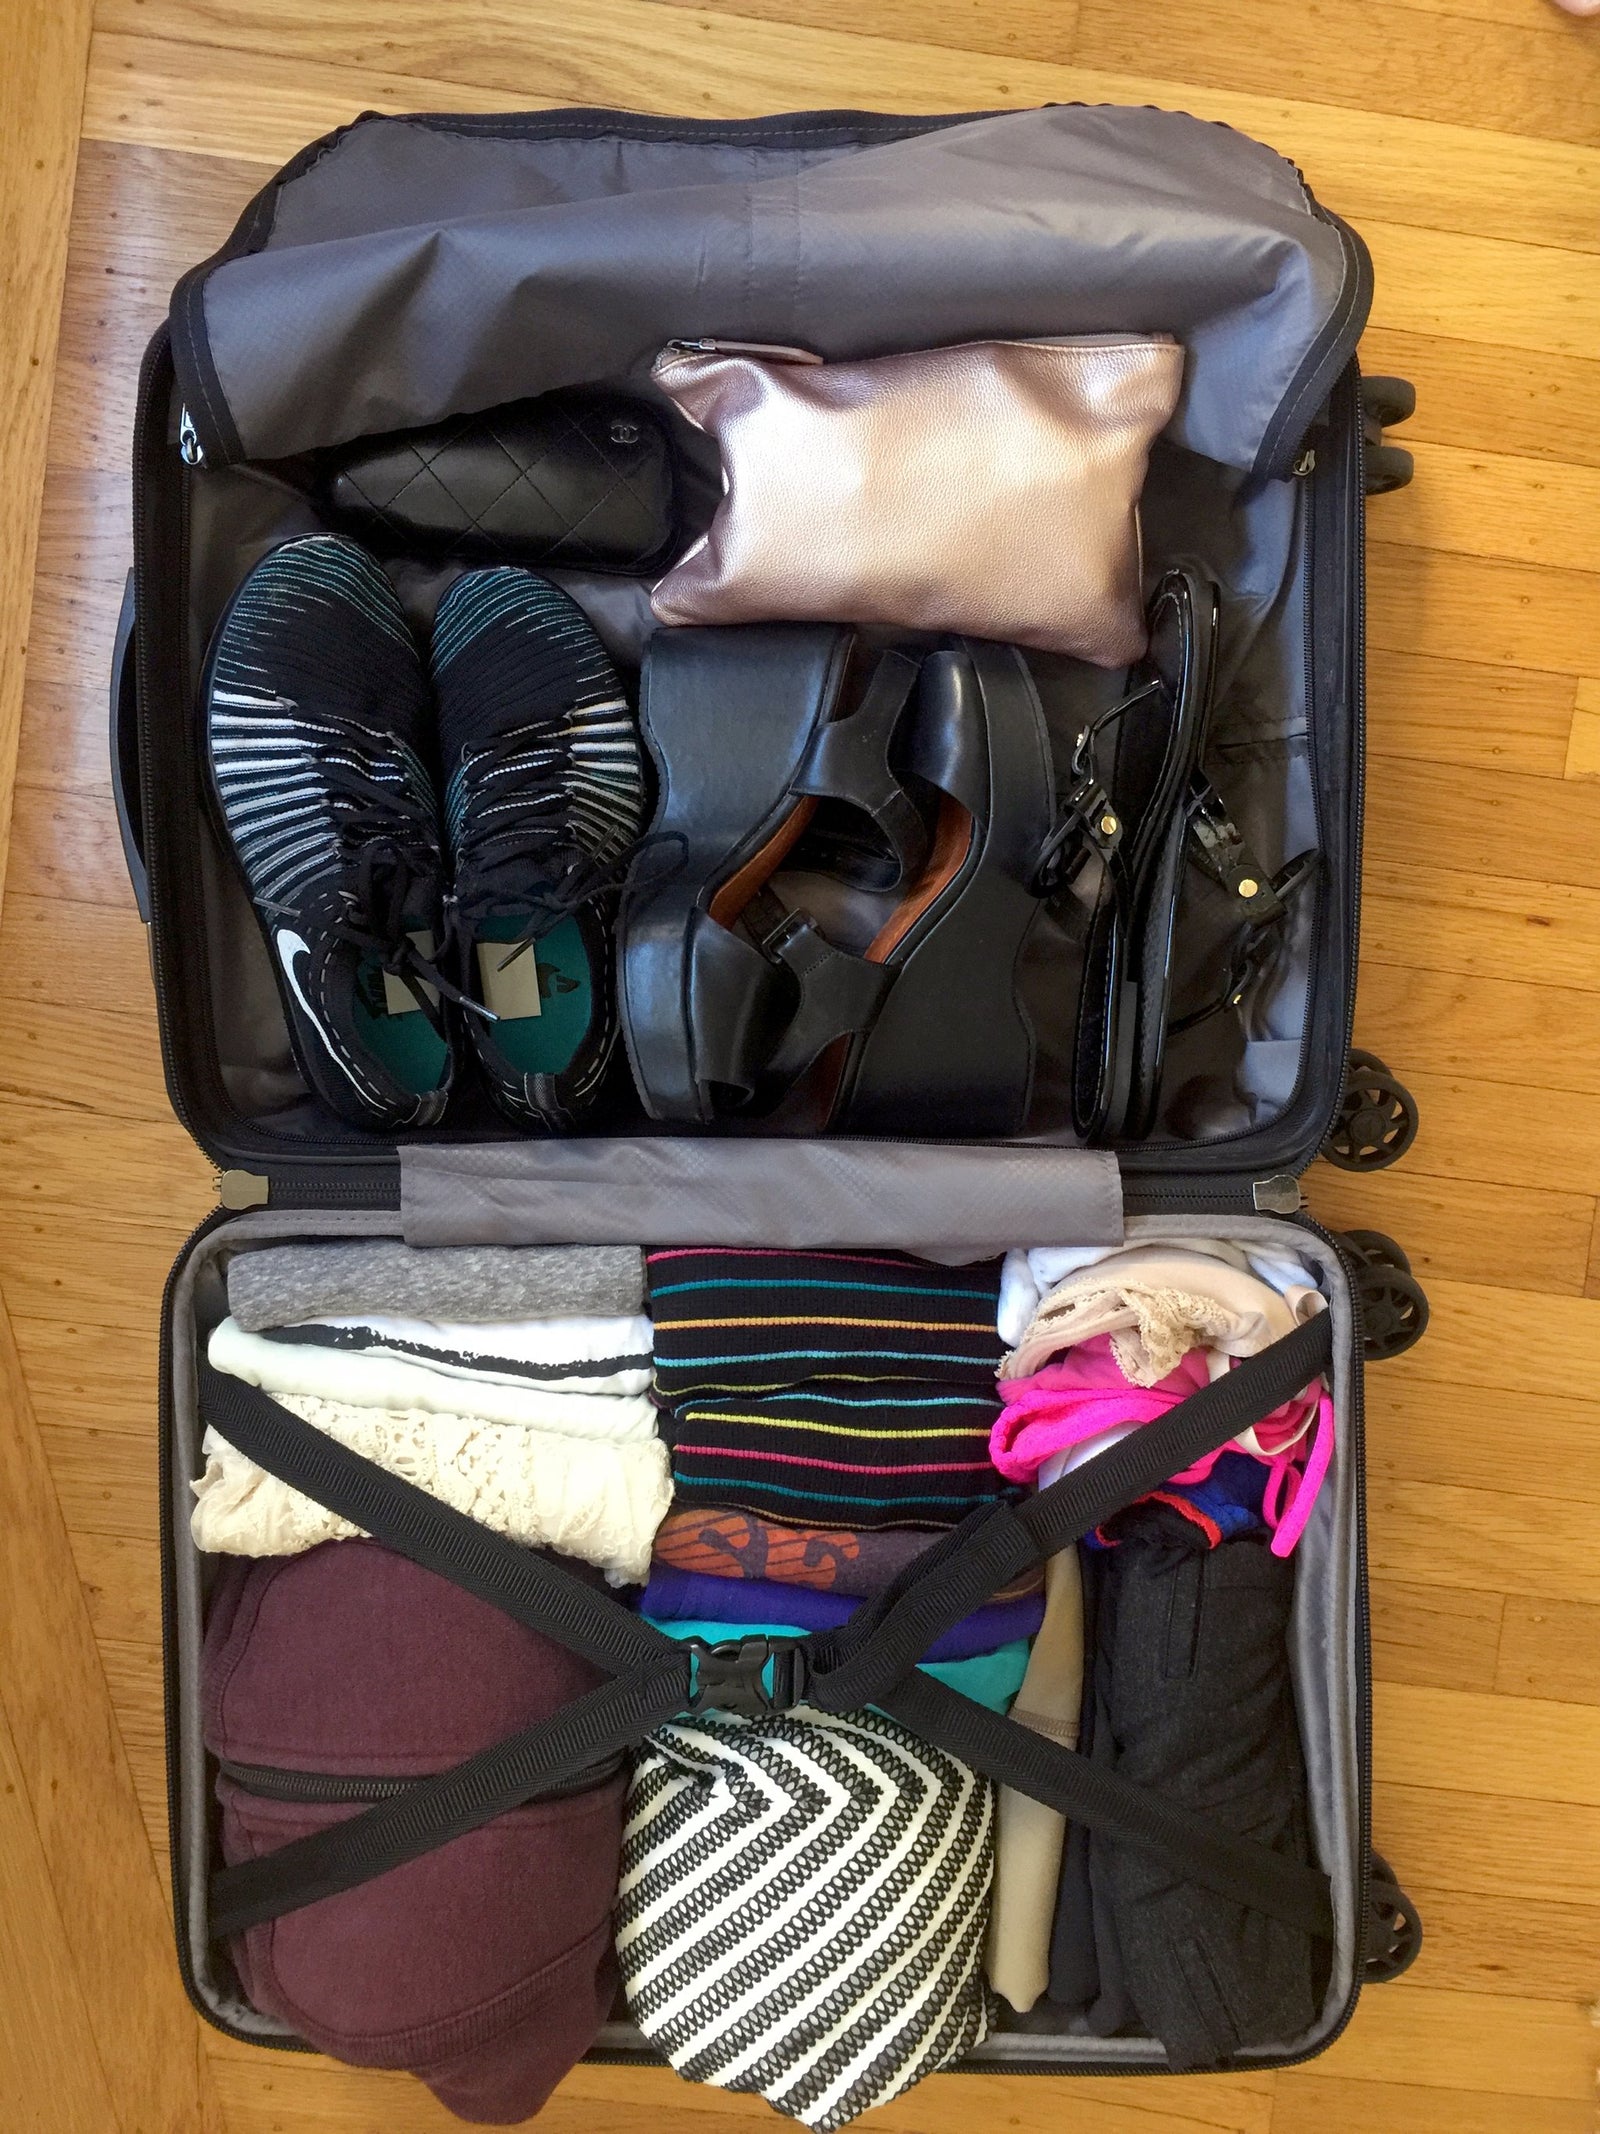 The Best Ways to Pack a Suitcase